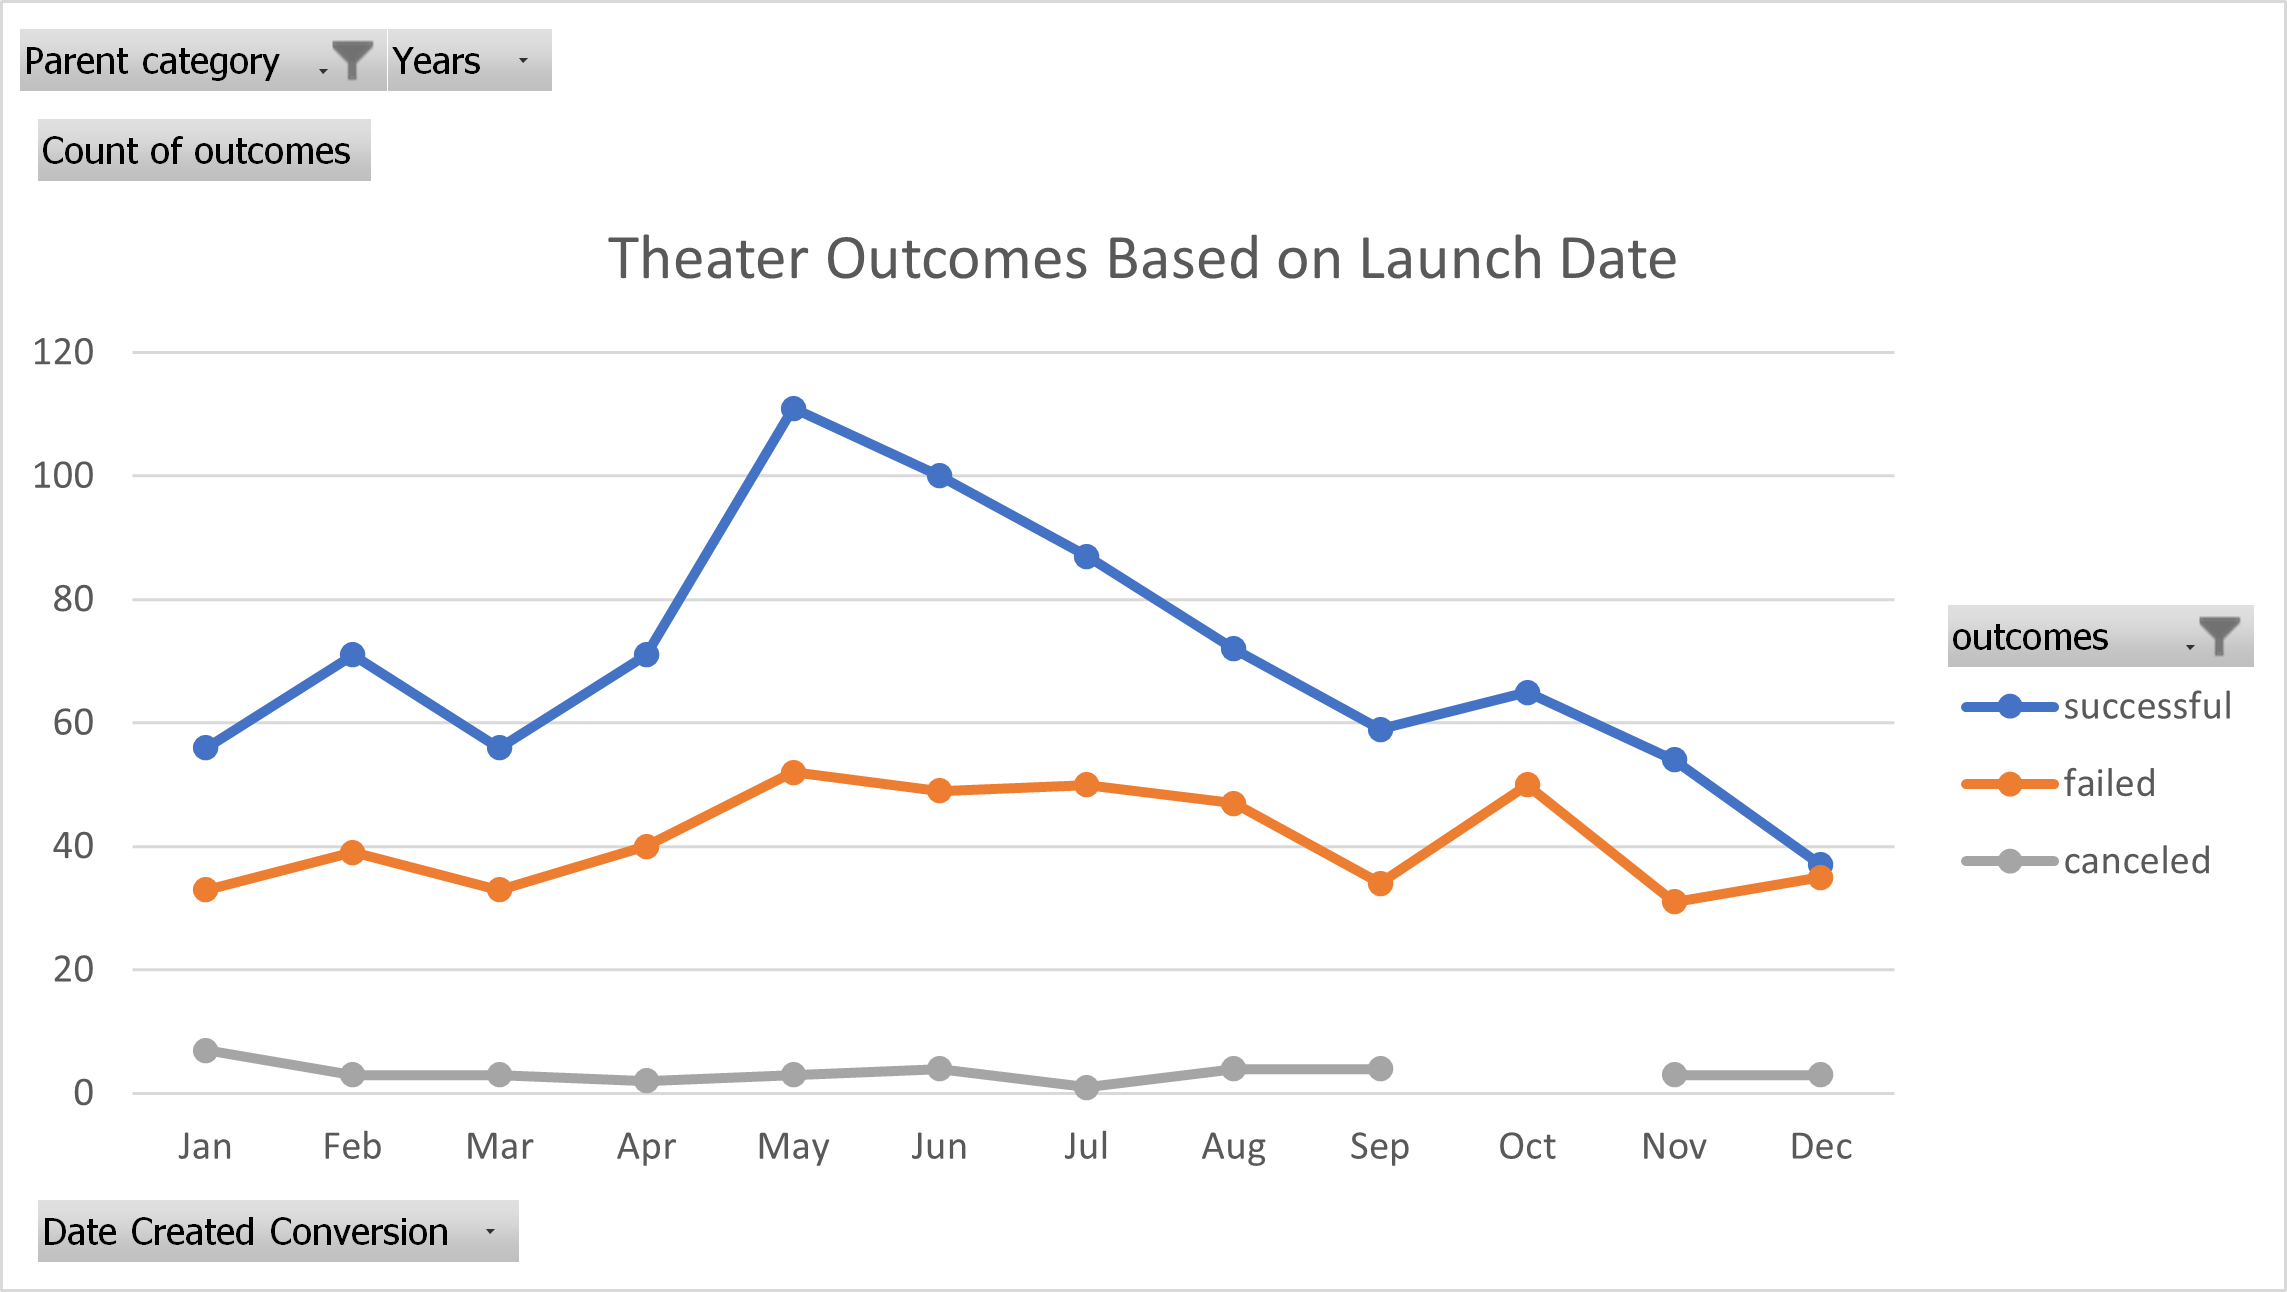 Analysis of Outcomes Based on Launch Date